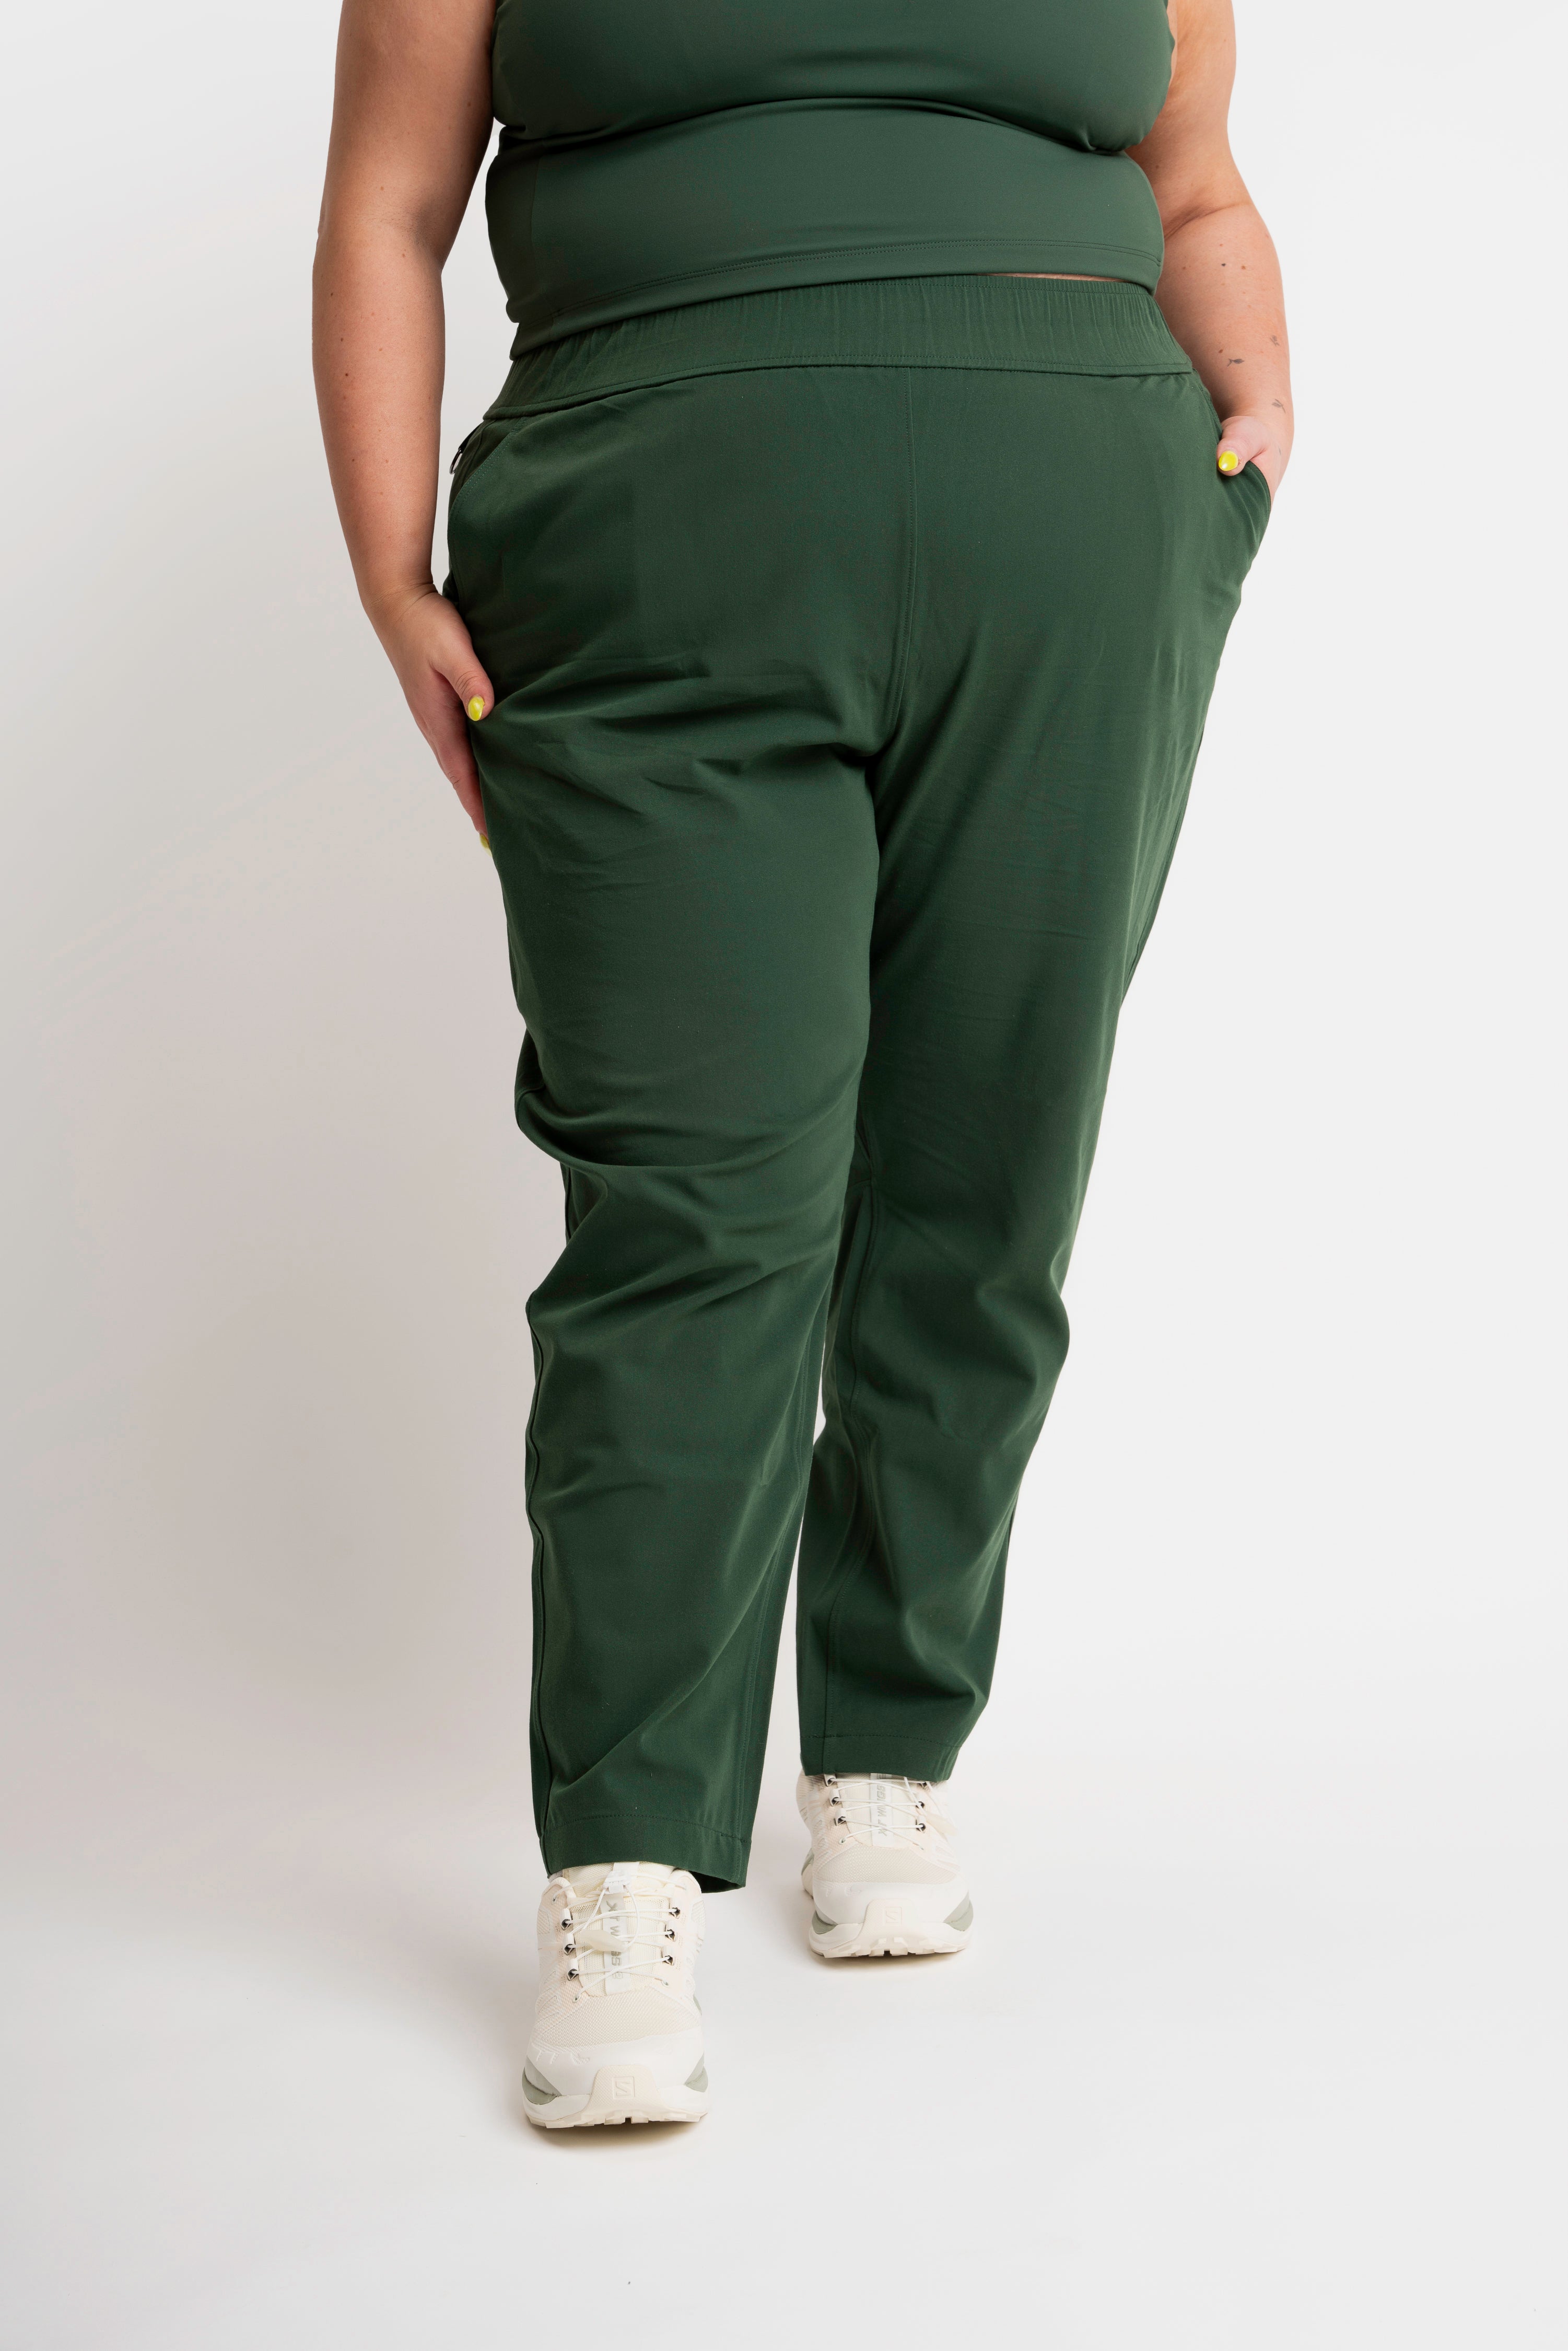 Buy Deepee Twister Cotton Pants - Bottoms for Every Occasion! – Deepee  Online Store